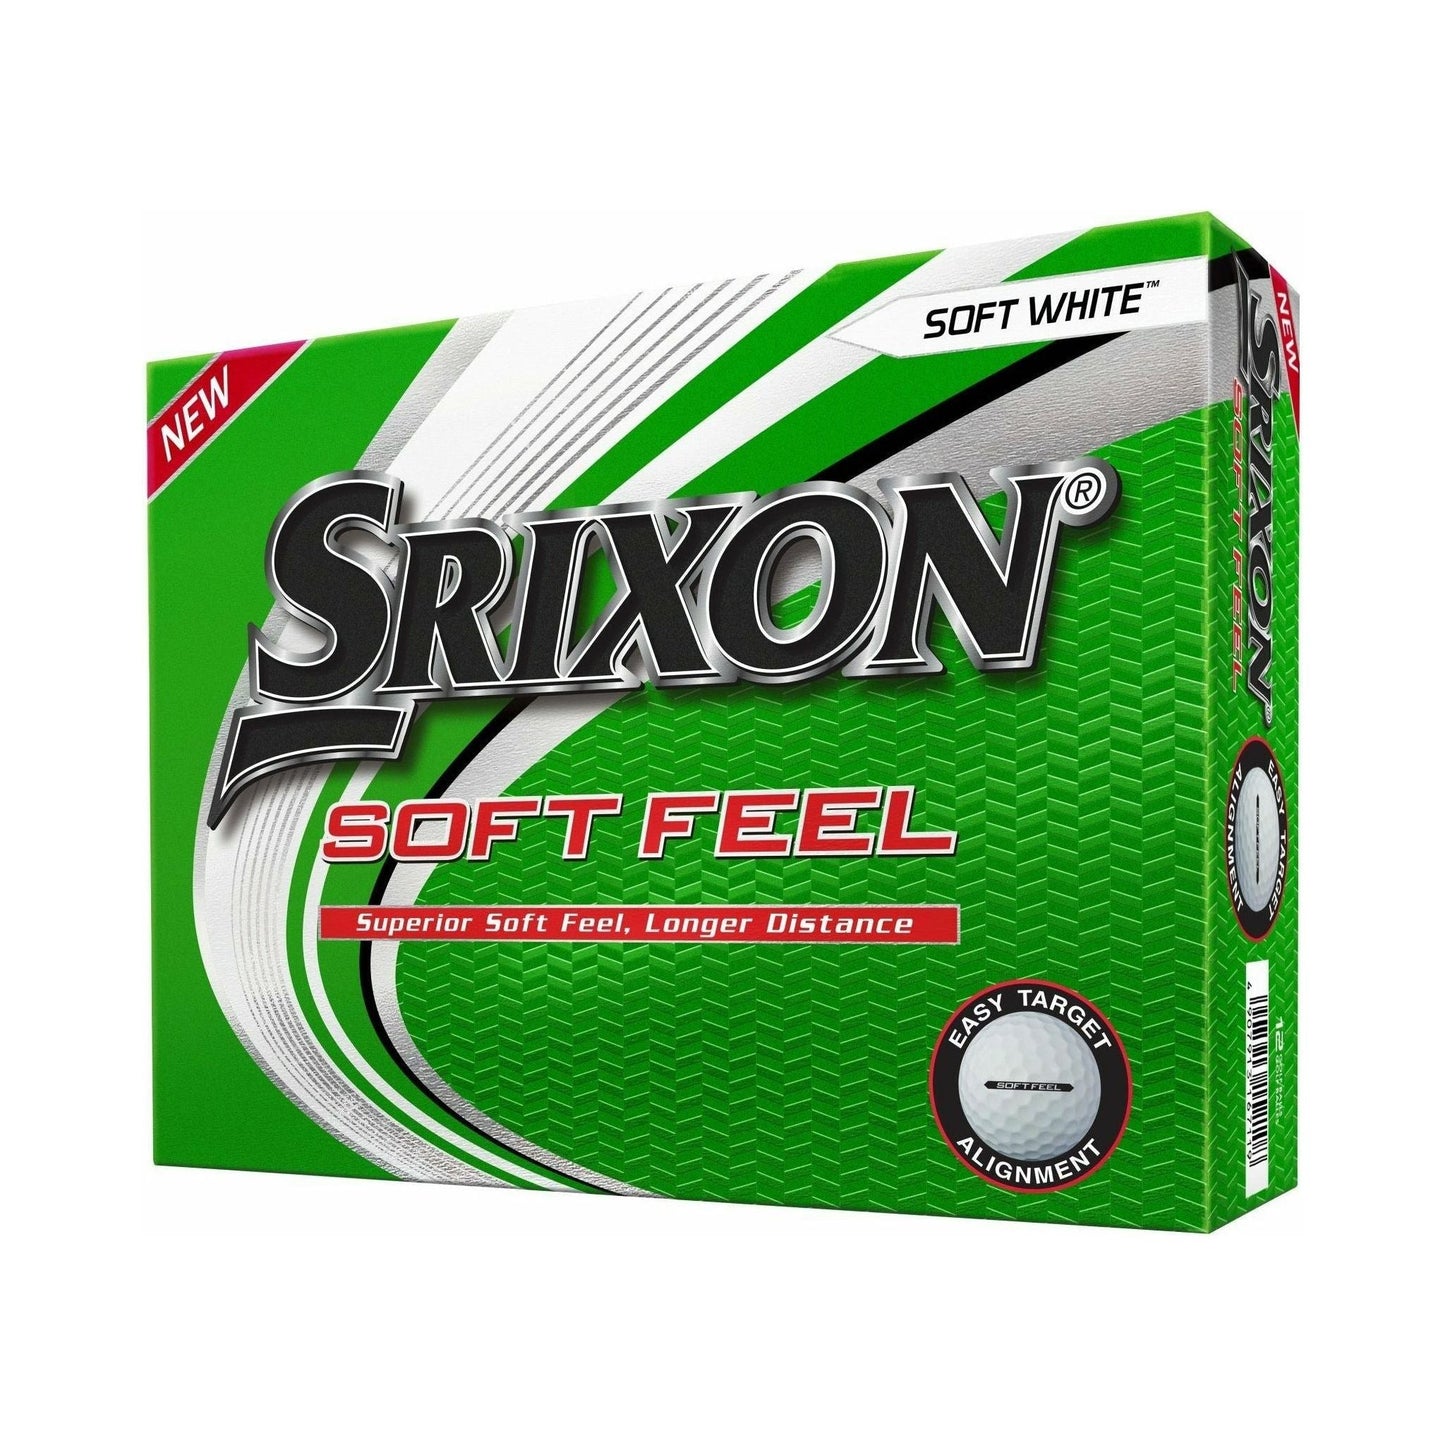 Srixon Soft Feel Golf Balls - Pack of 12 - COMING SOON ABF The Soldiers' Charity Shop  (6594827780287)